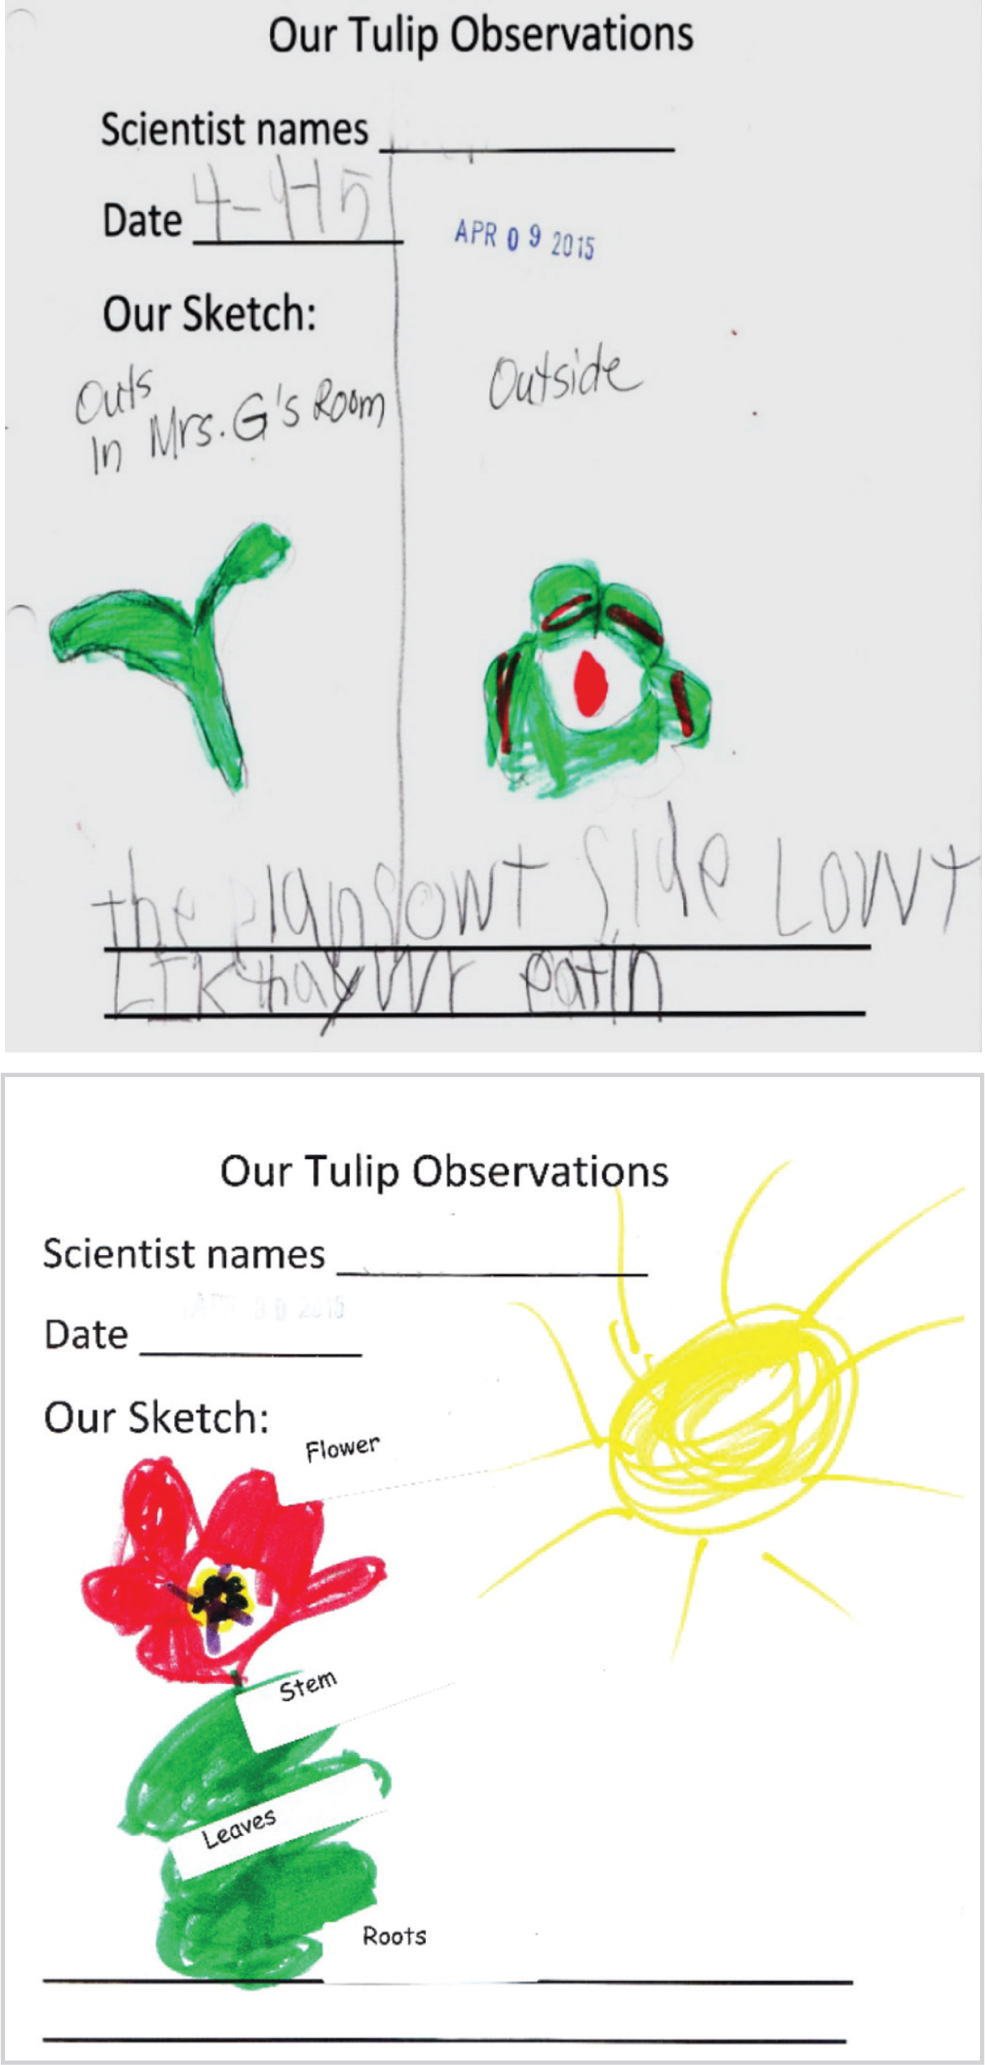 Examples of student observations.